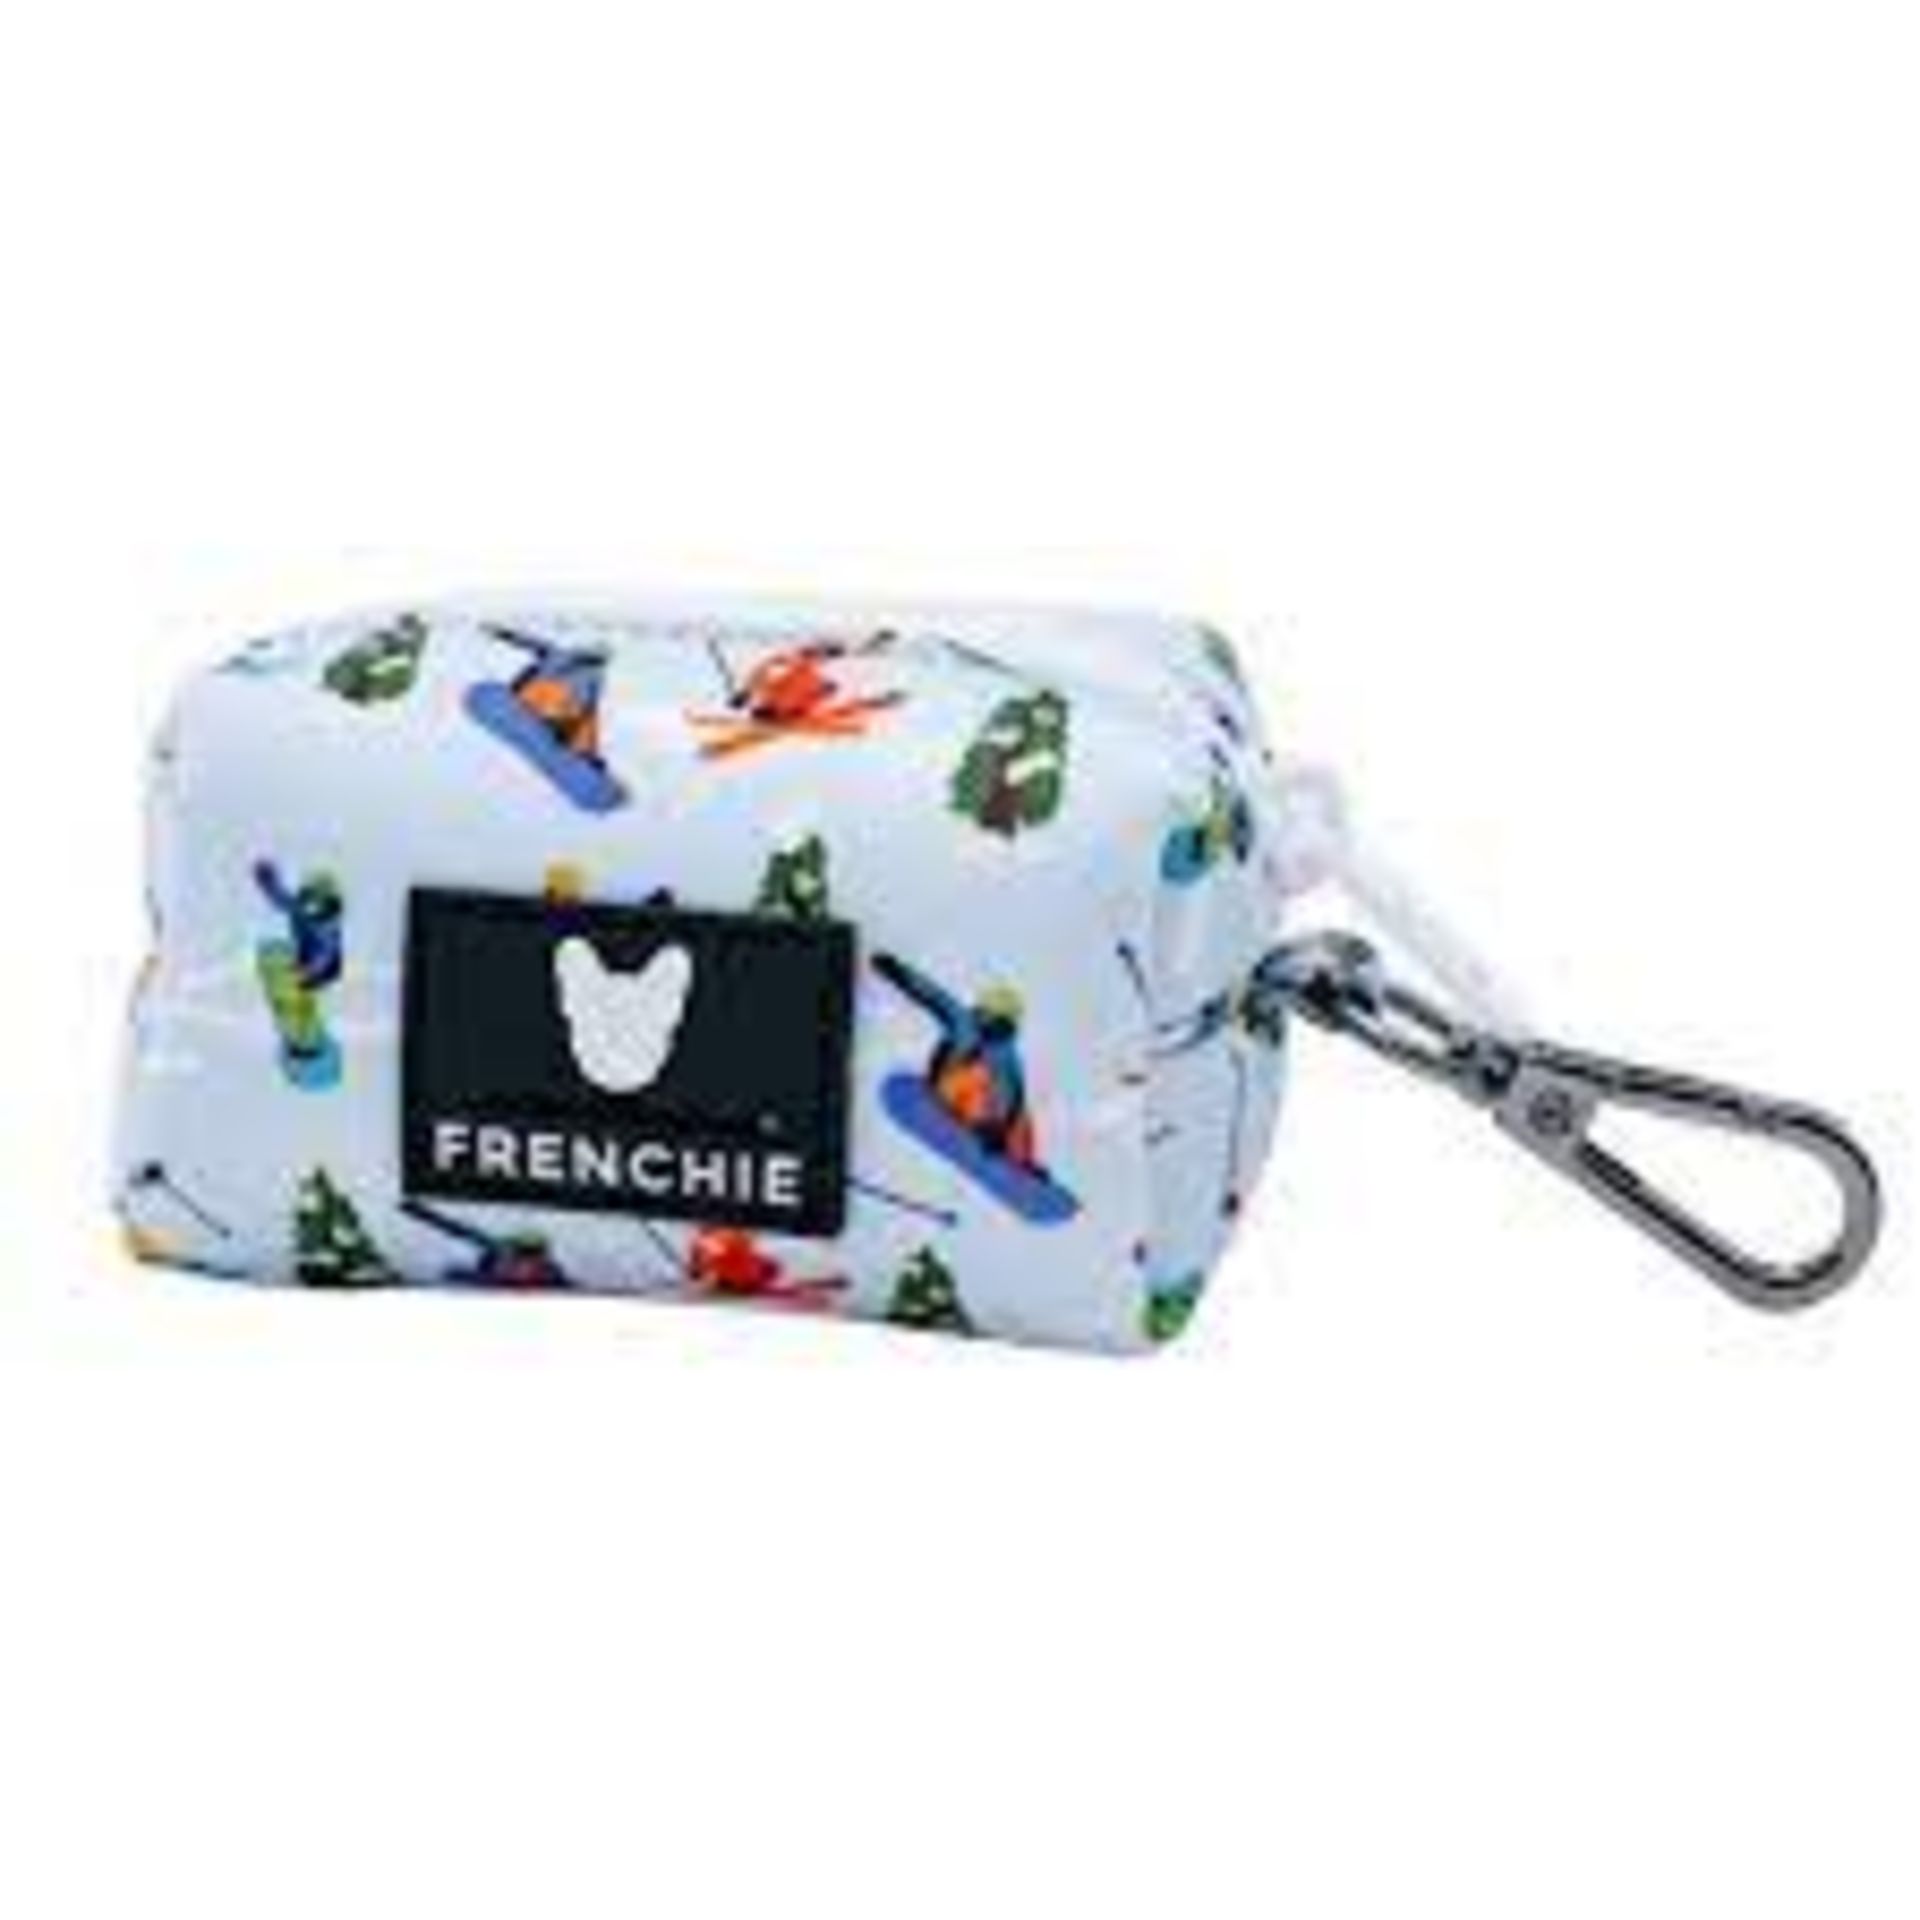 Bulk Trade Lot 500 X New .Packaged Frenchie The Bulldog Luxury Branded Dog Products. May include - Image 25 of 50